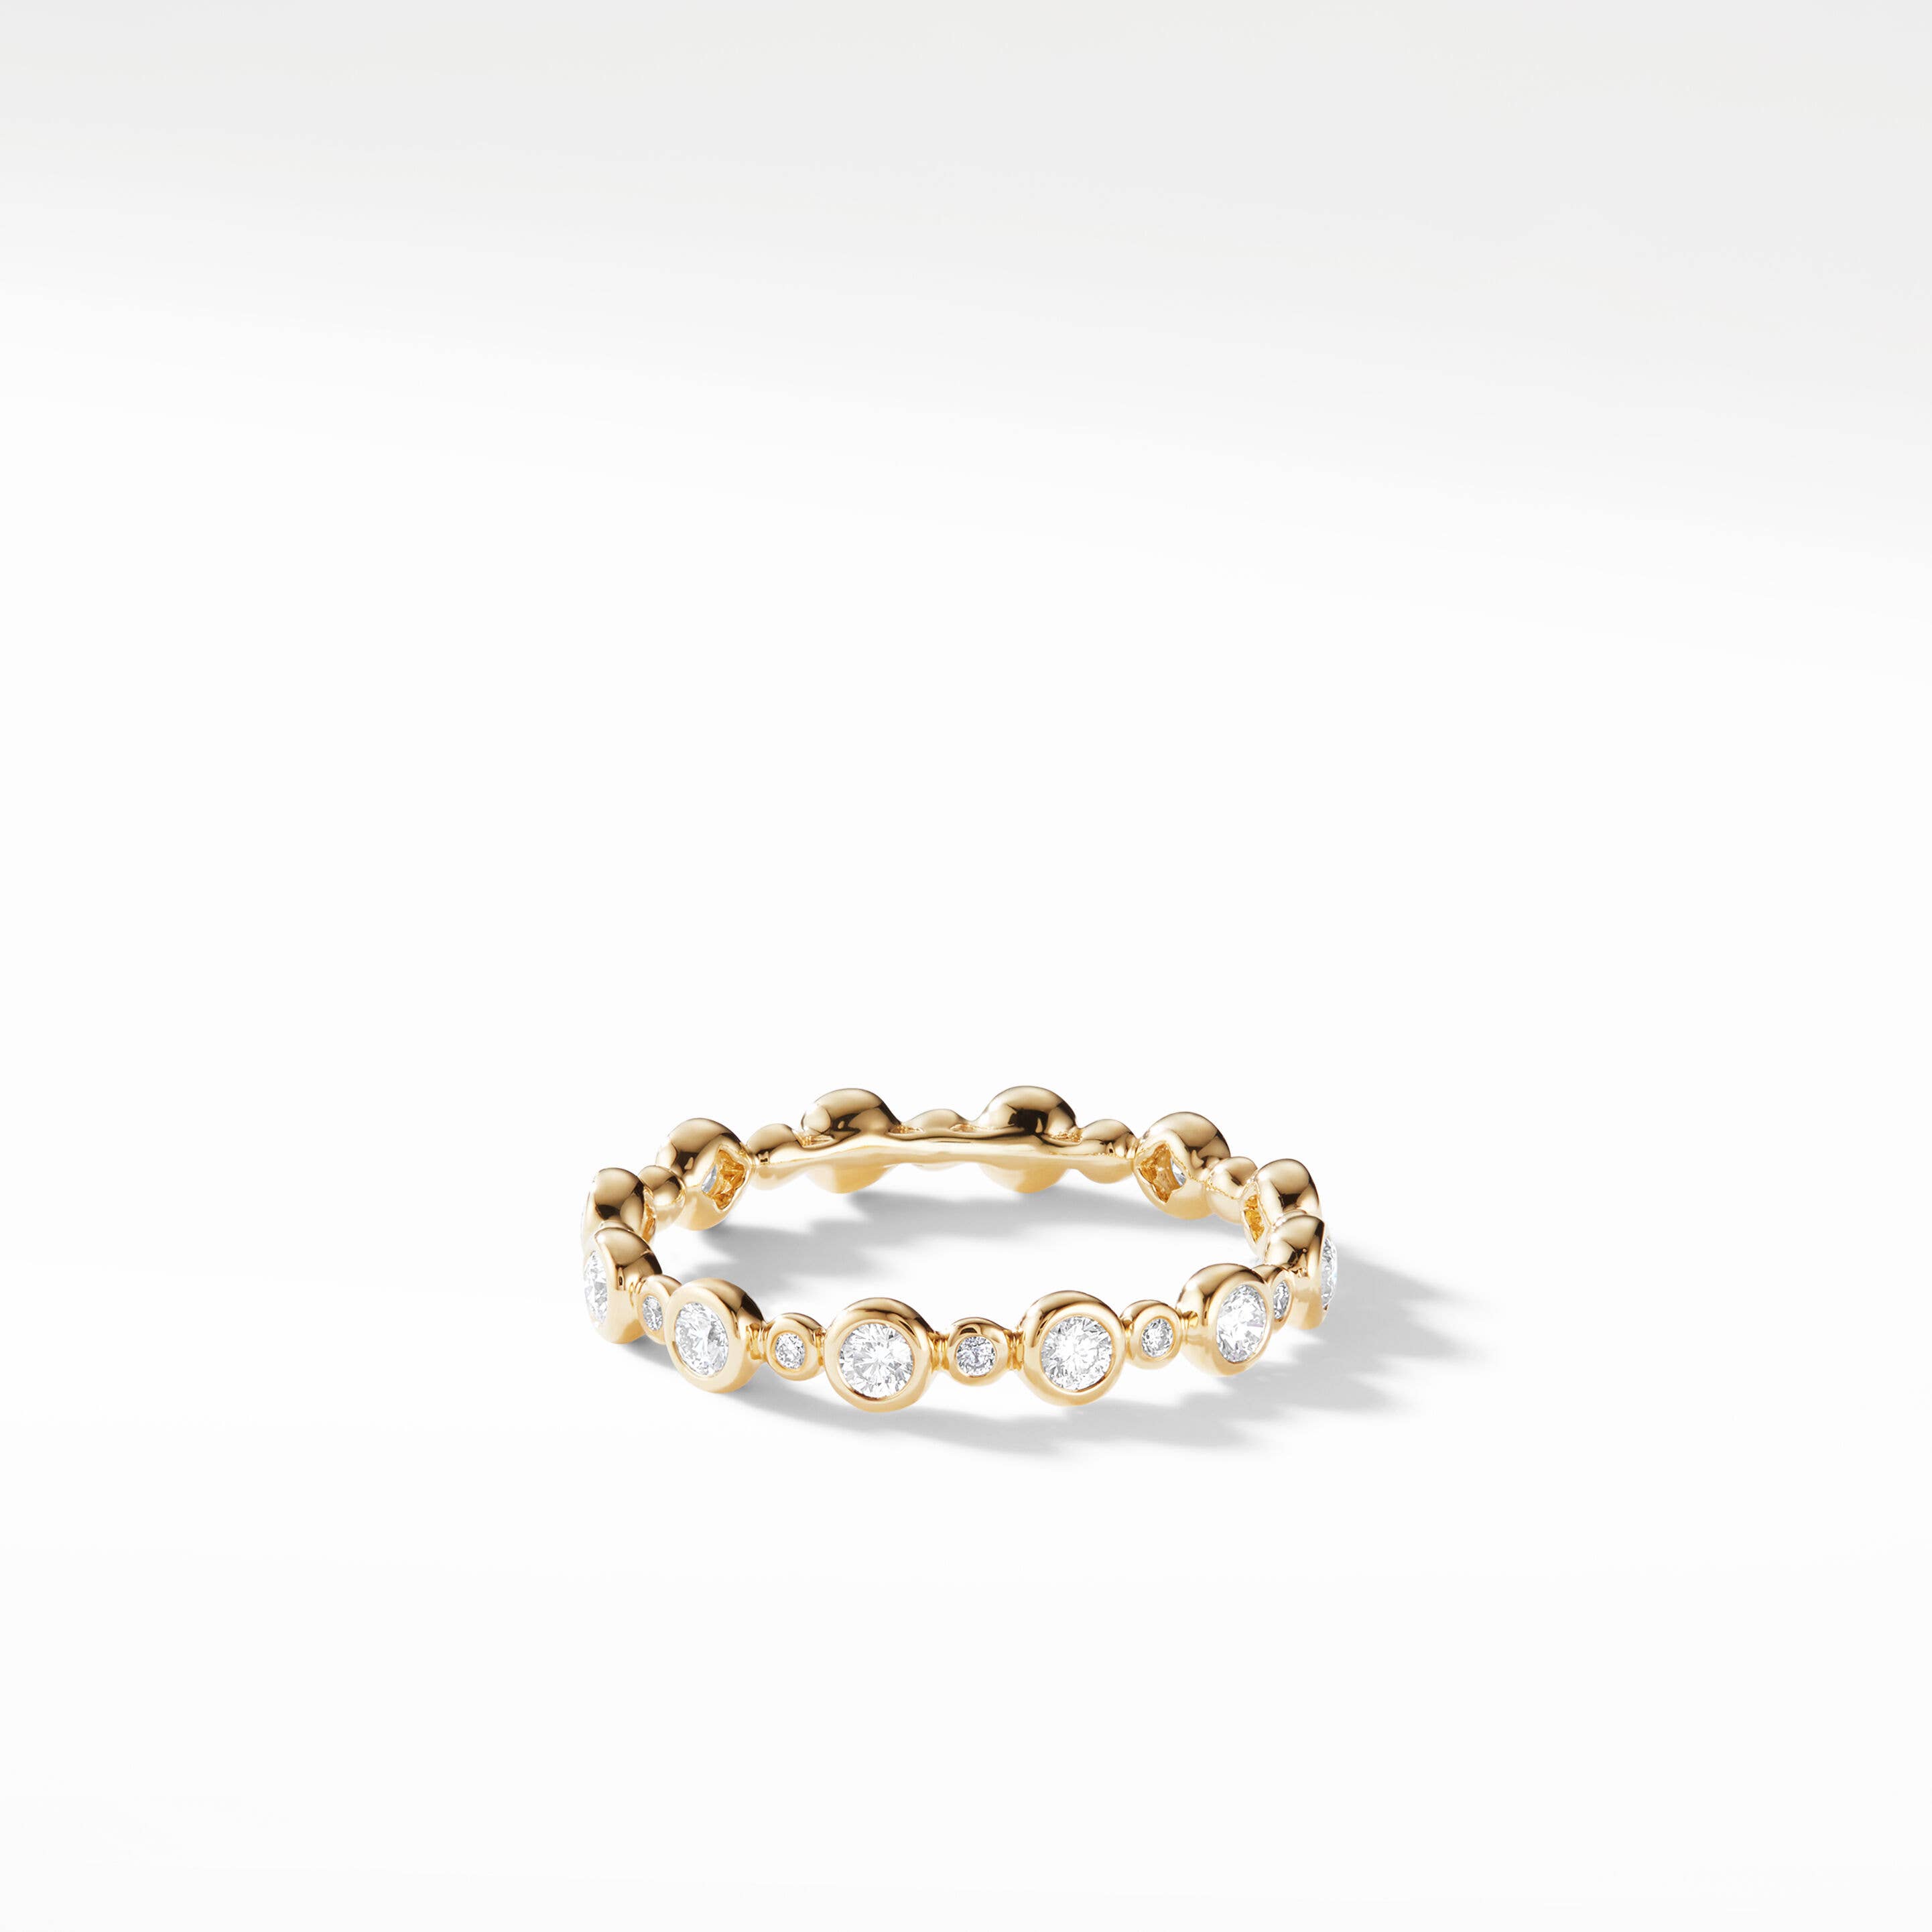 DY Starlight Band Ring in 18K Yellow Gold with Diamonds